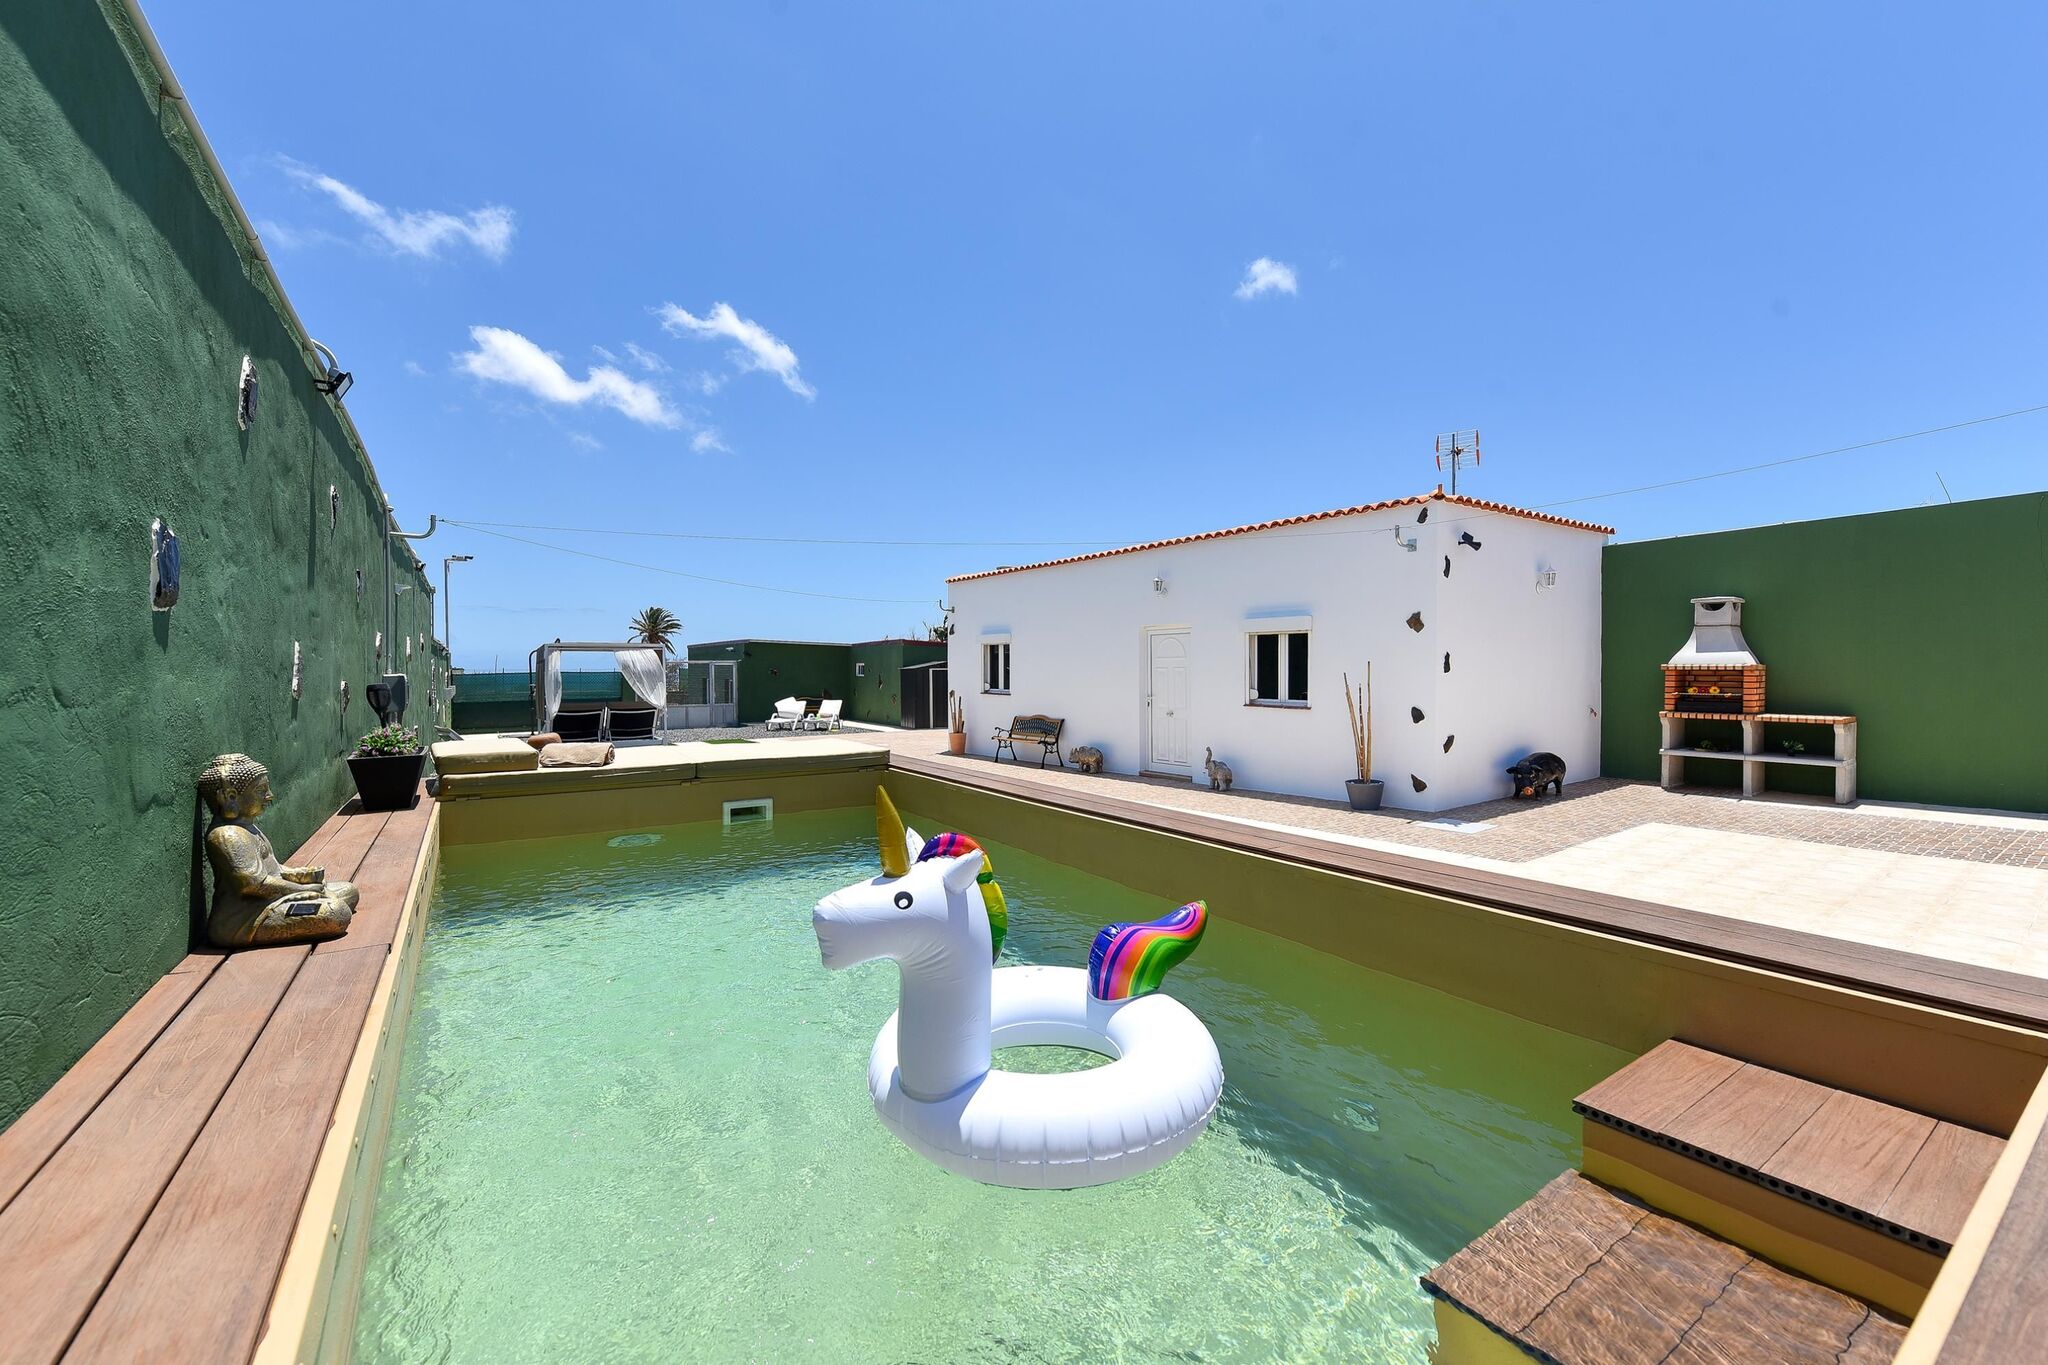 Rural holiday home for families and groups with a beautiful private pool